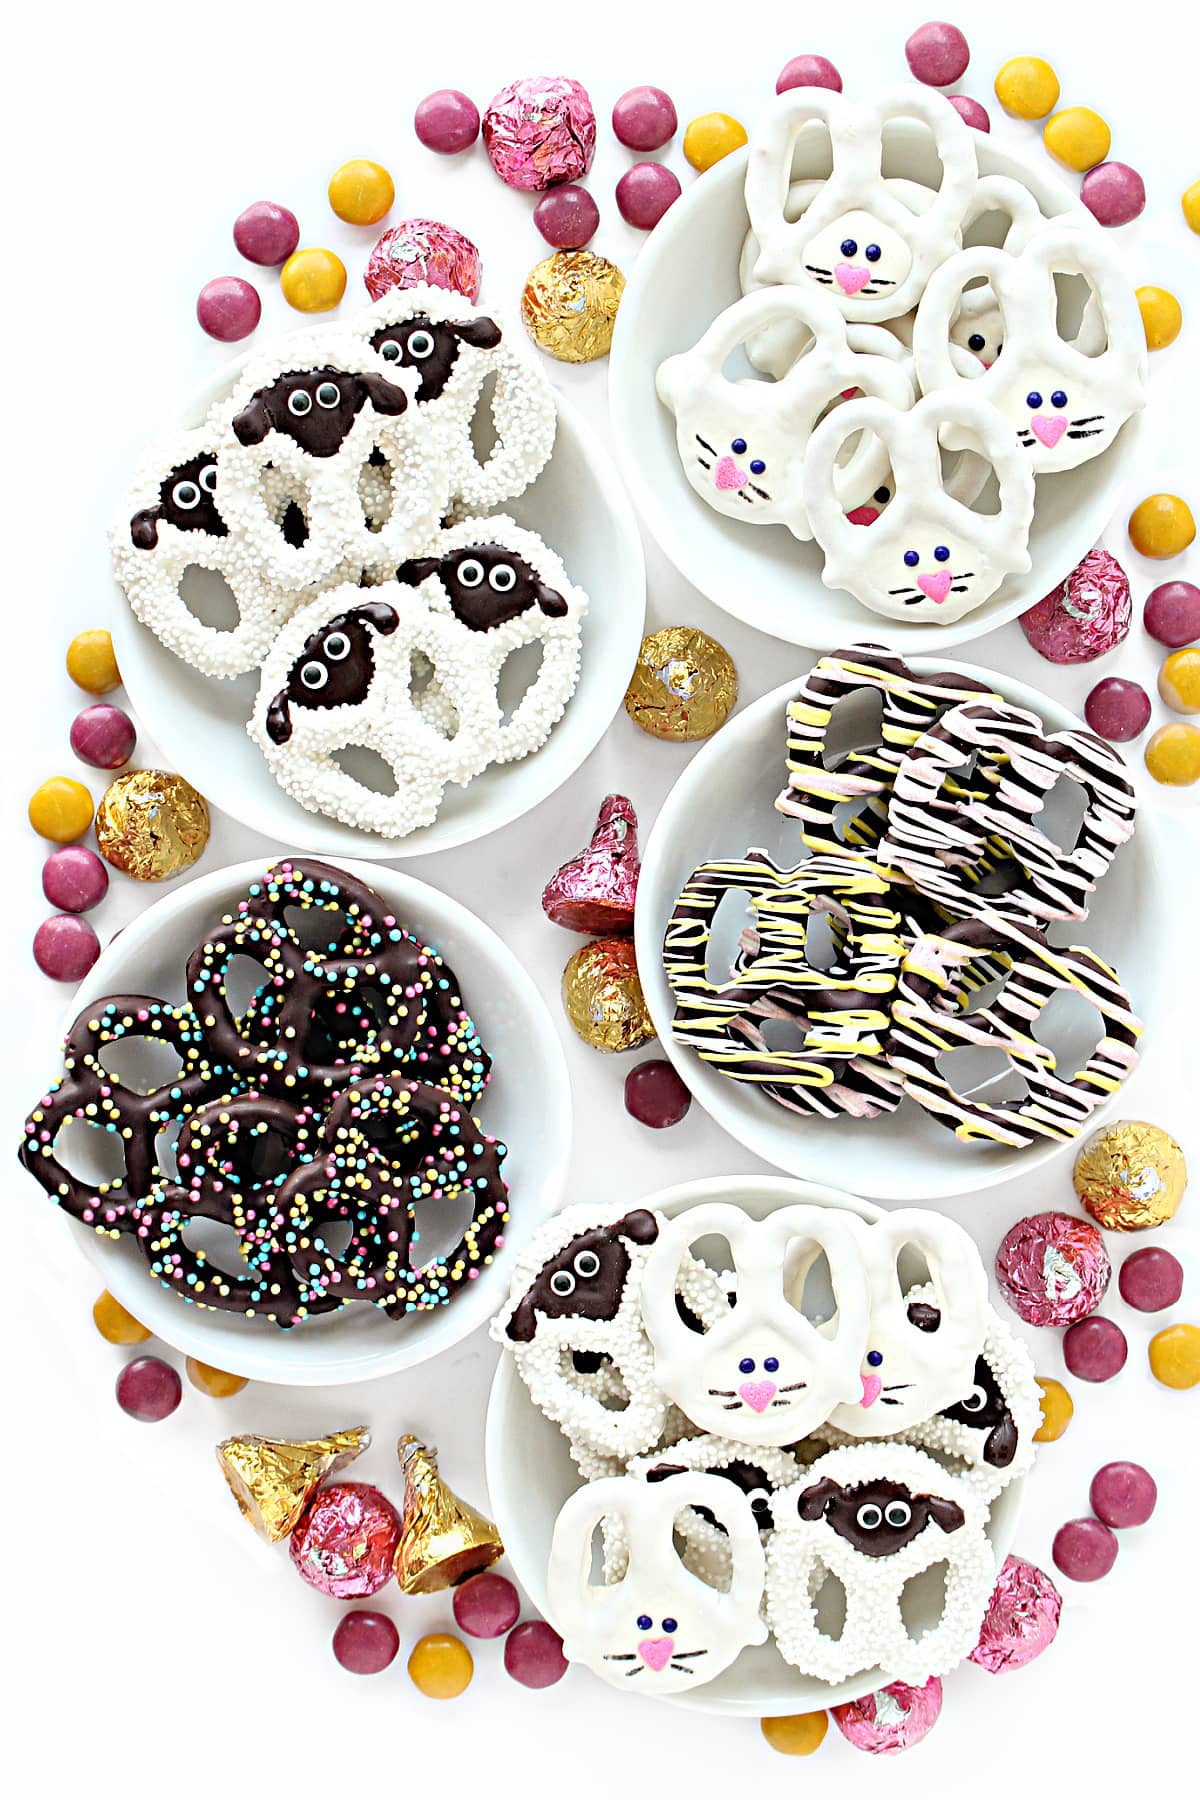 White chocolate dipped pretzel twists decorated like rabbits and sheep.